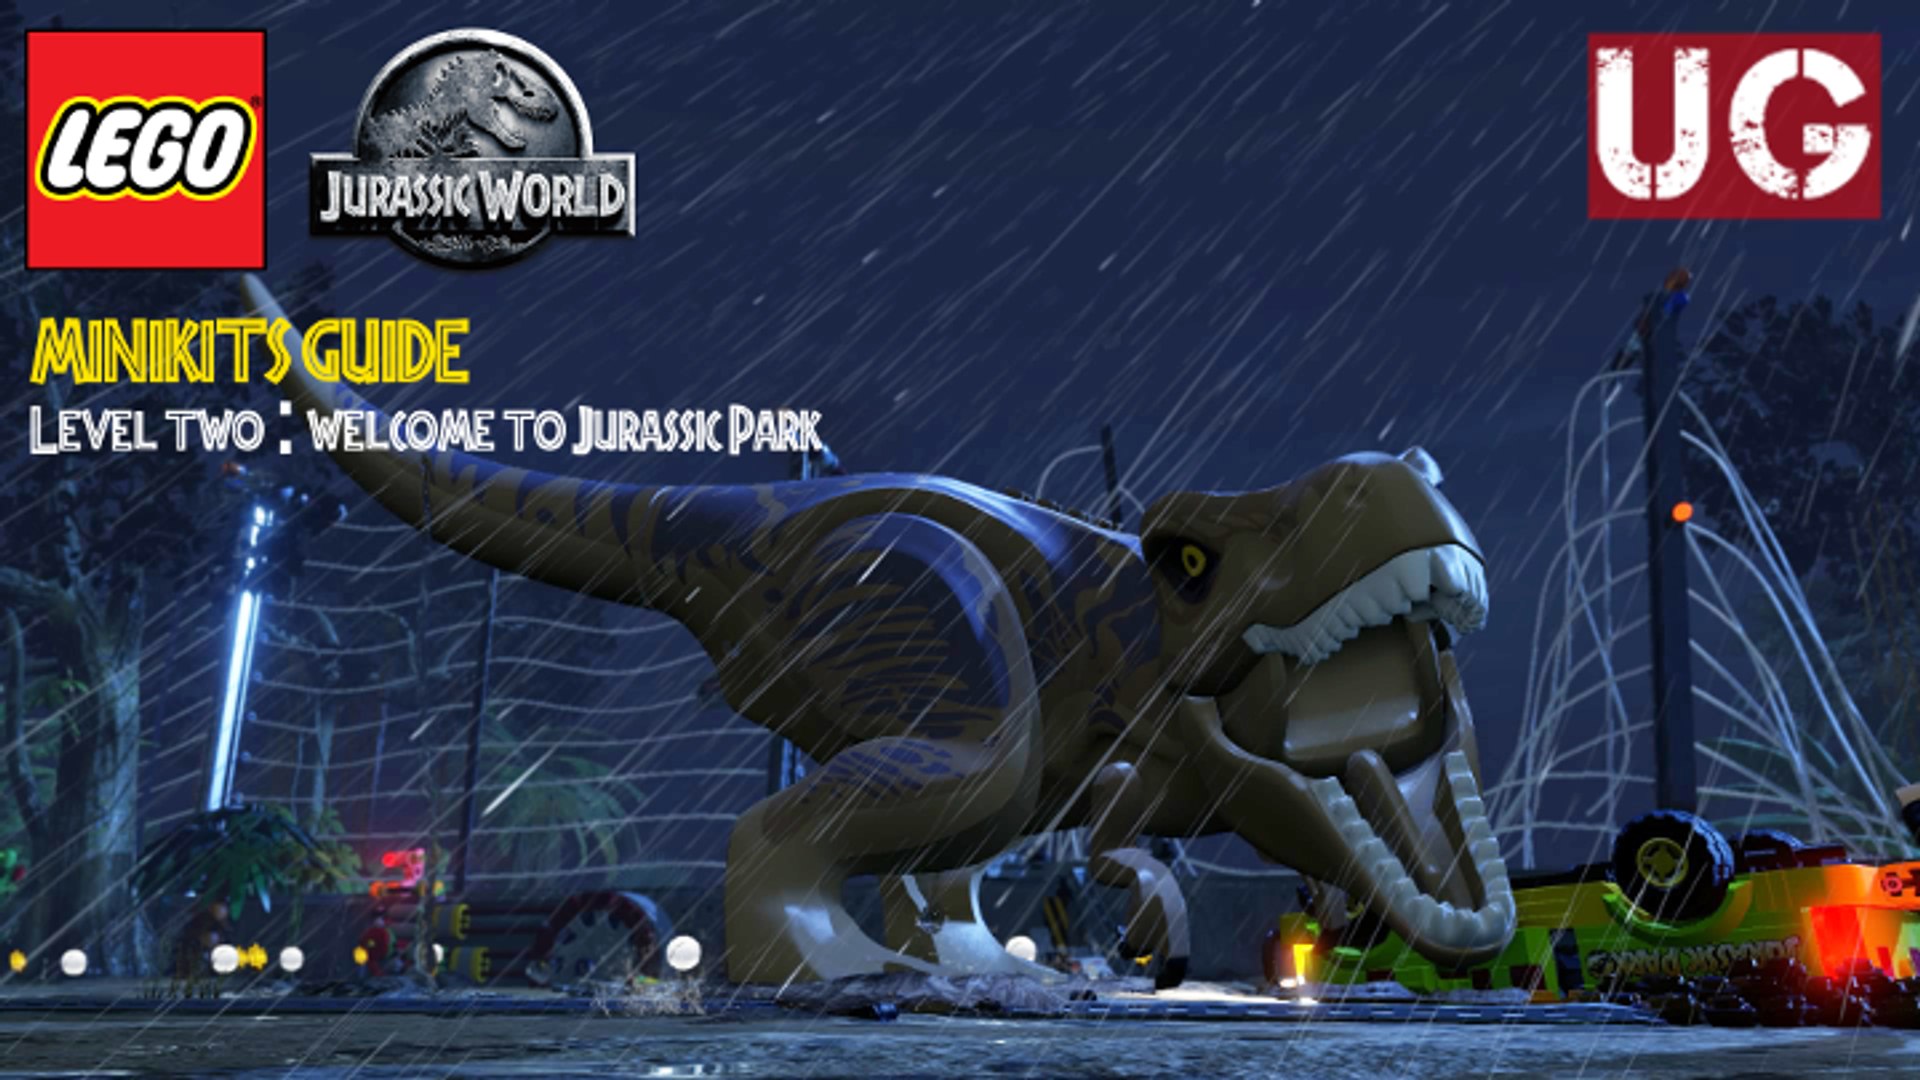 Lego Jurassic World - Level 2: Welcome To Jurassic Park Minikits Guide -  video Dailymotion